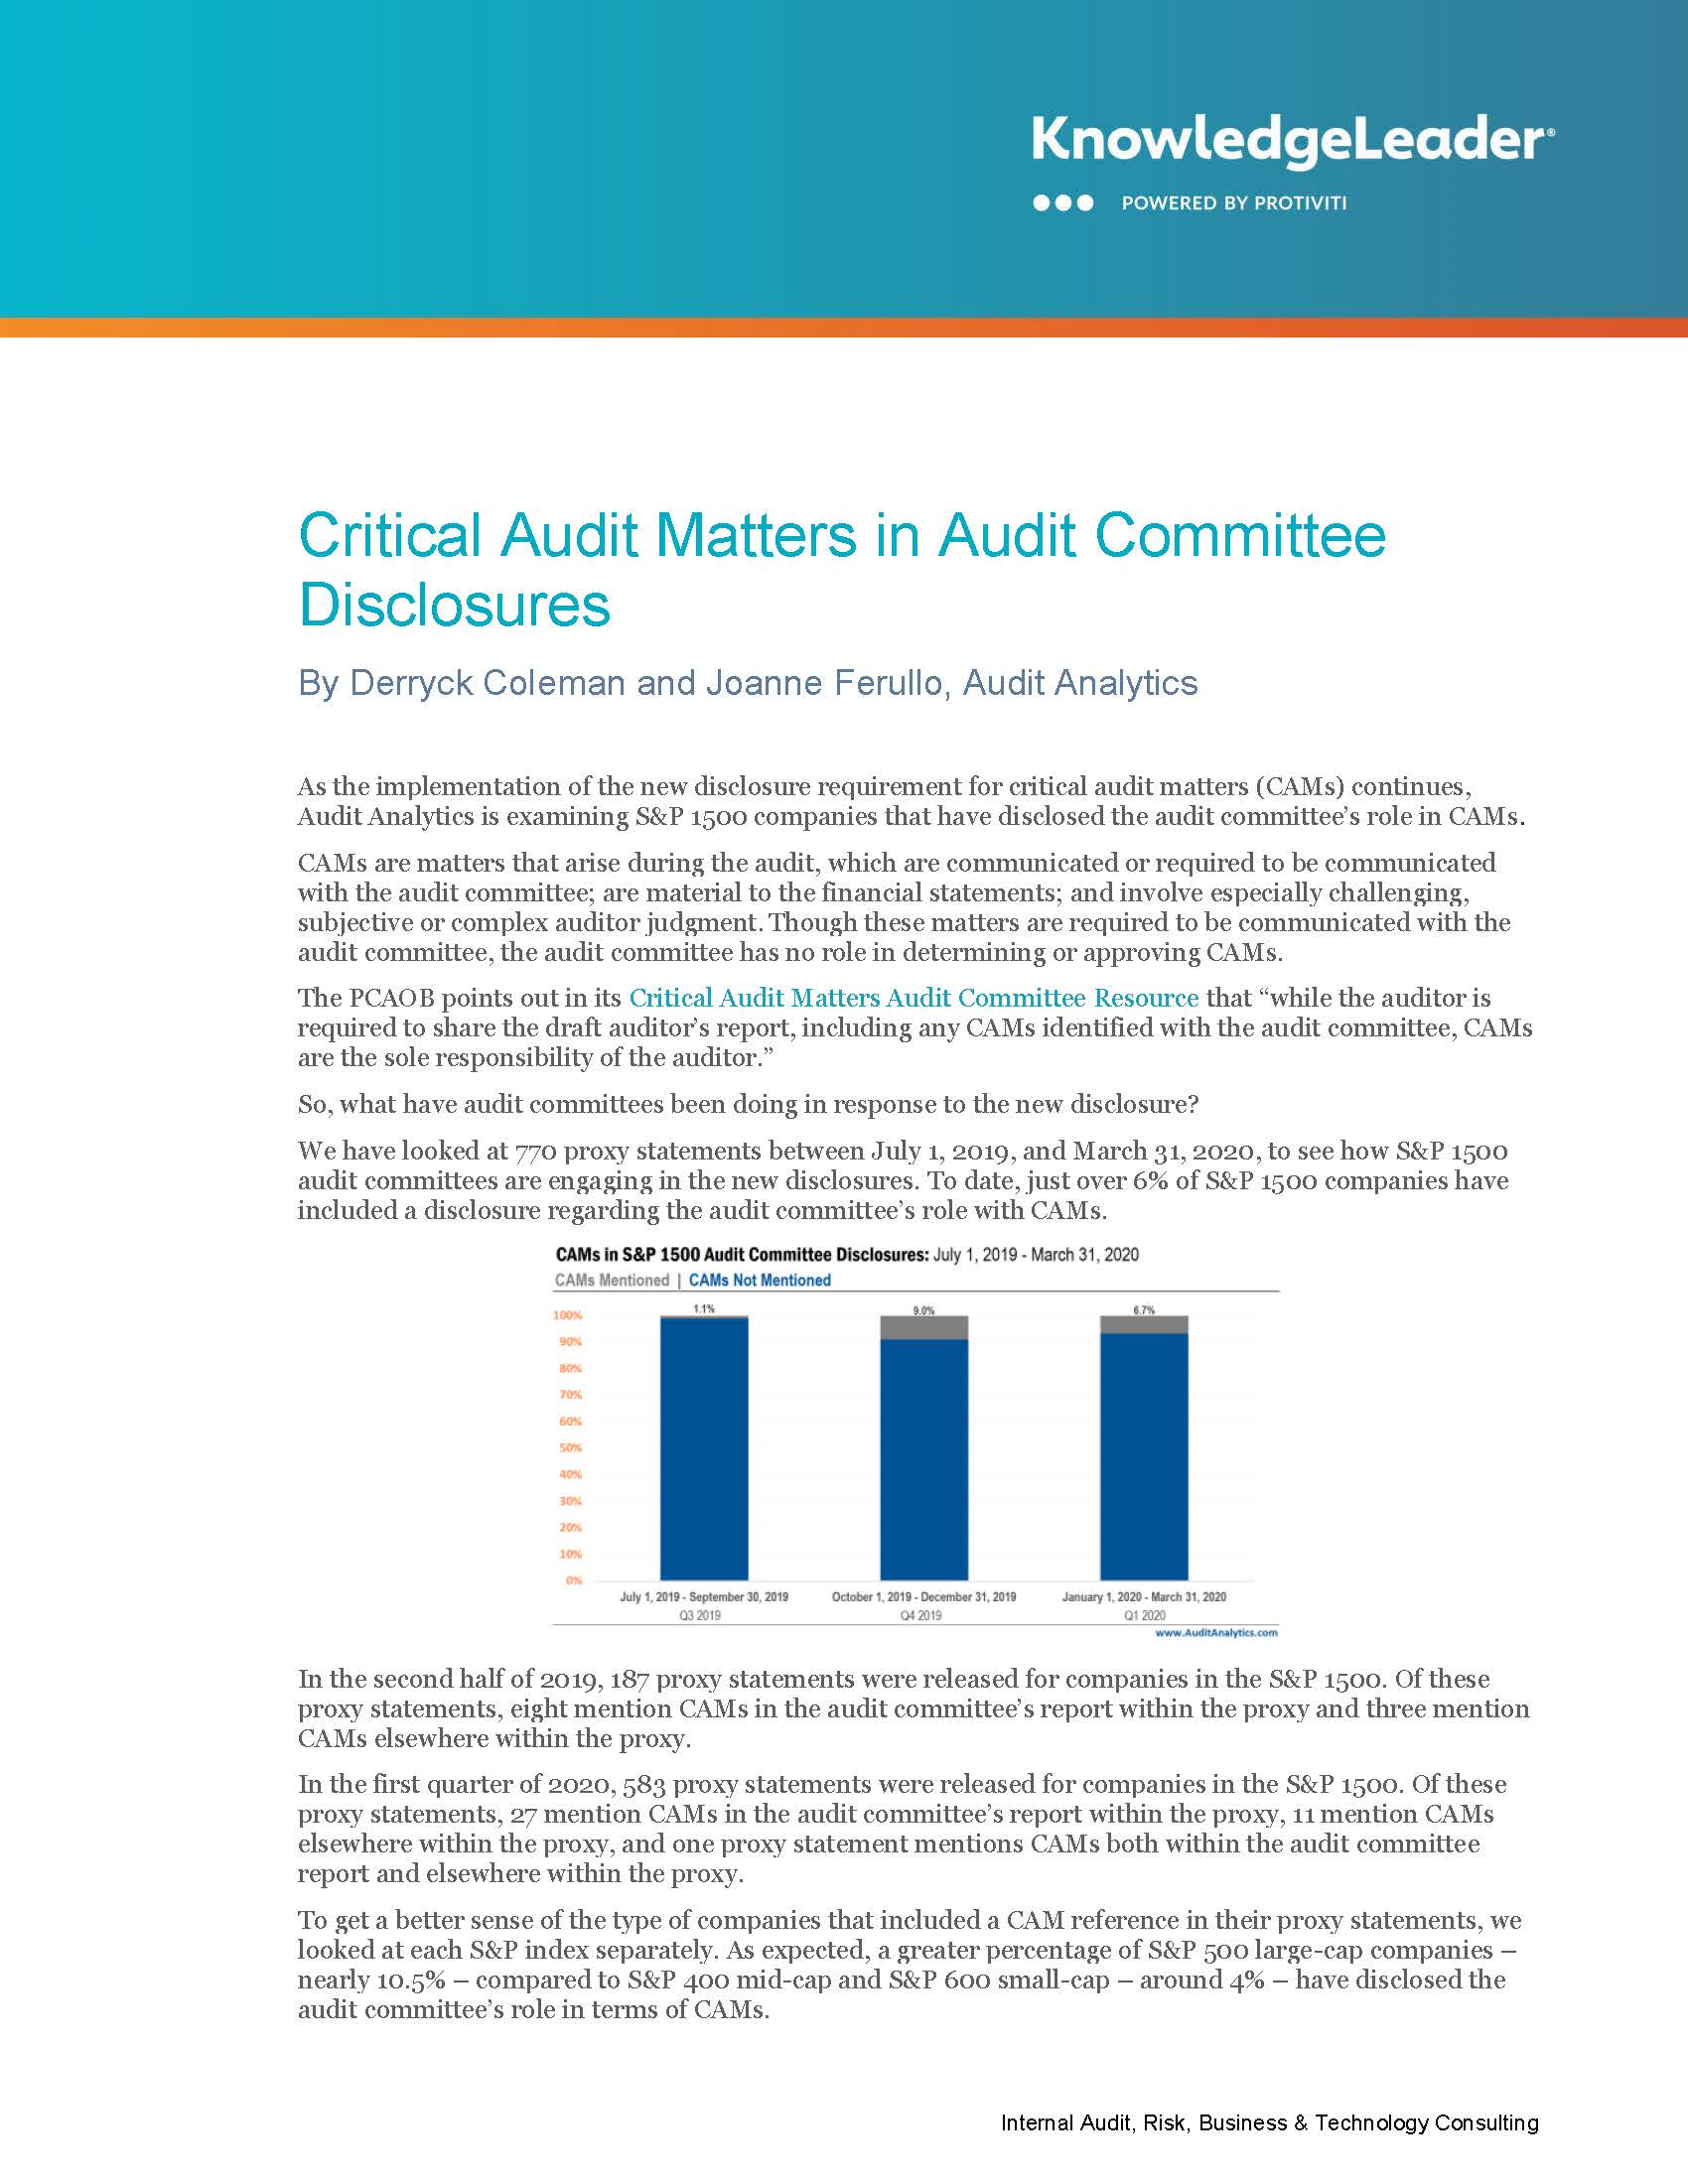 Critical Audit Matters in Audit Committee Disclosures